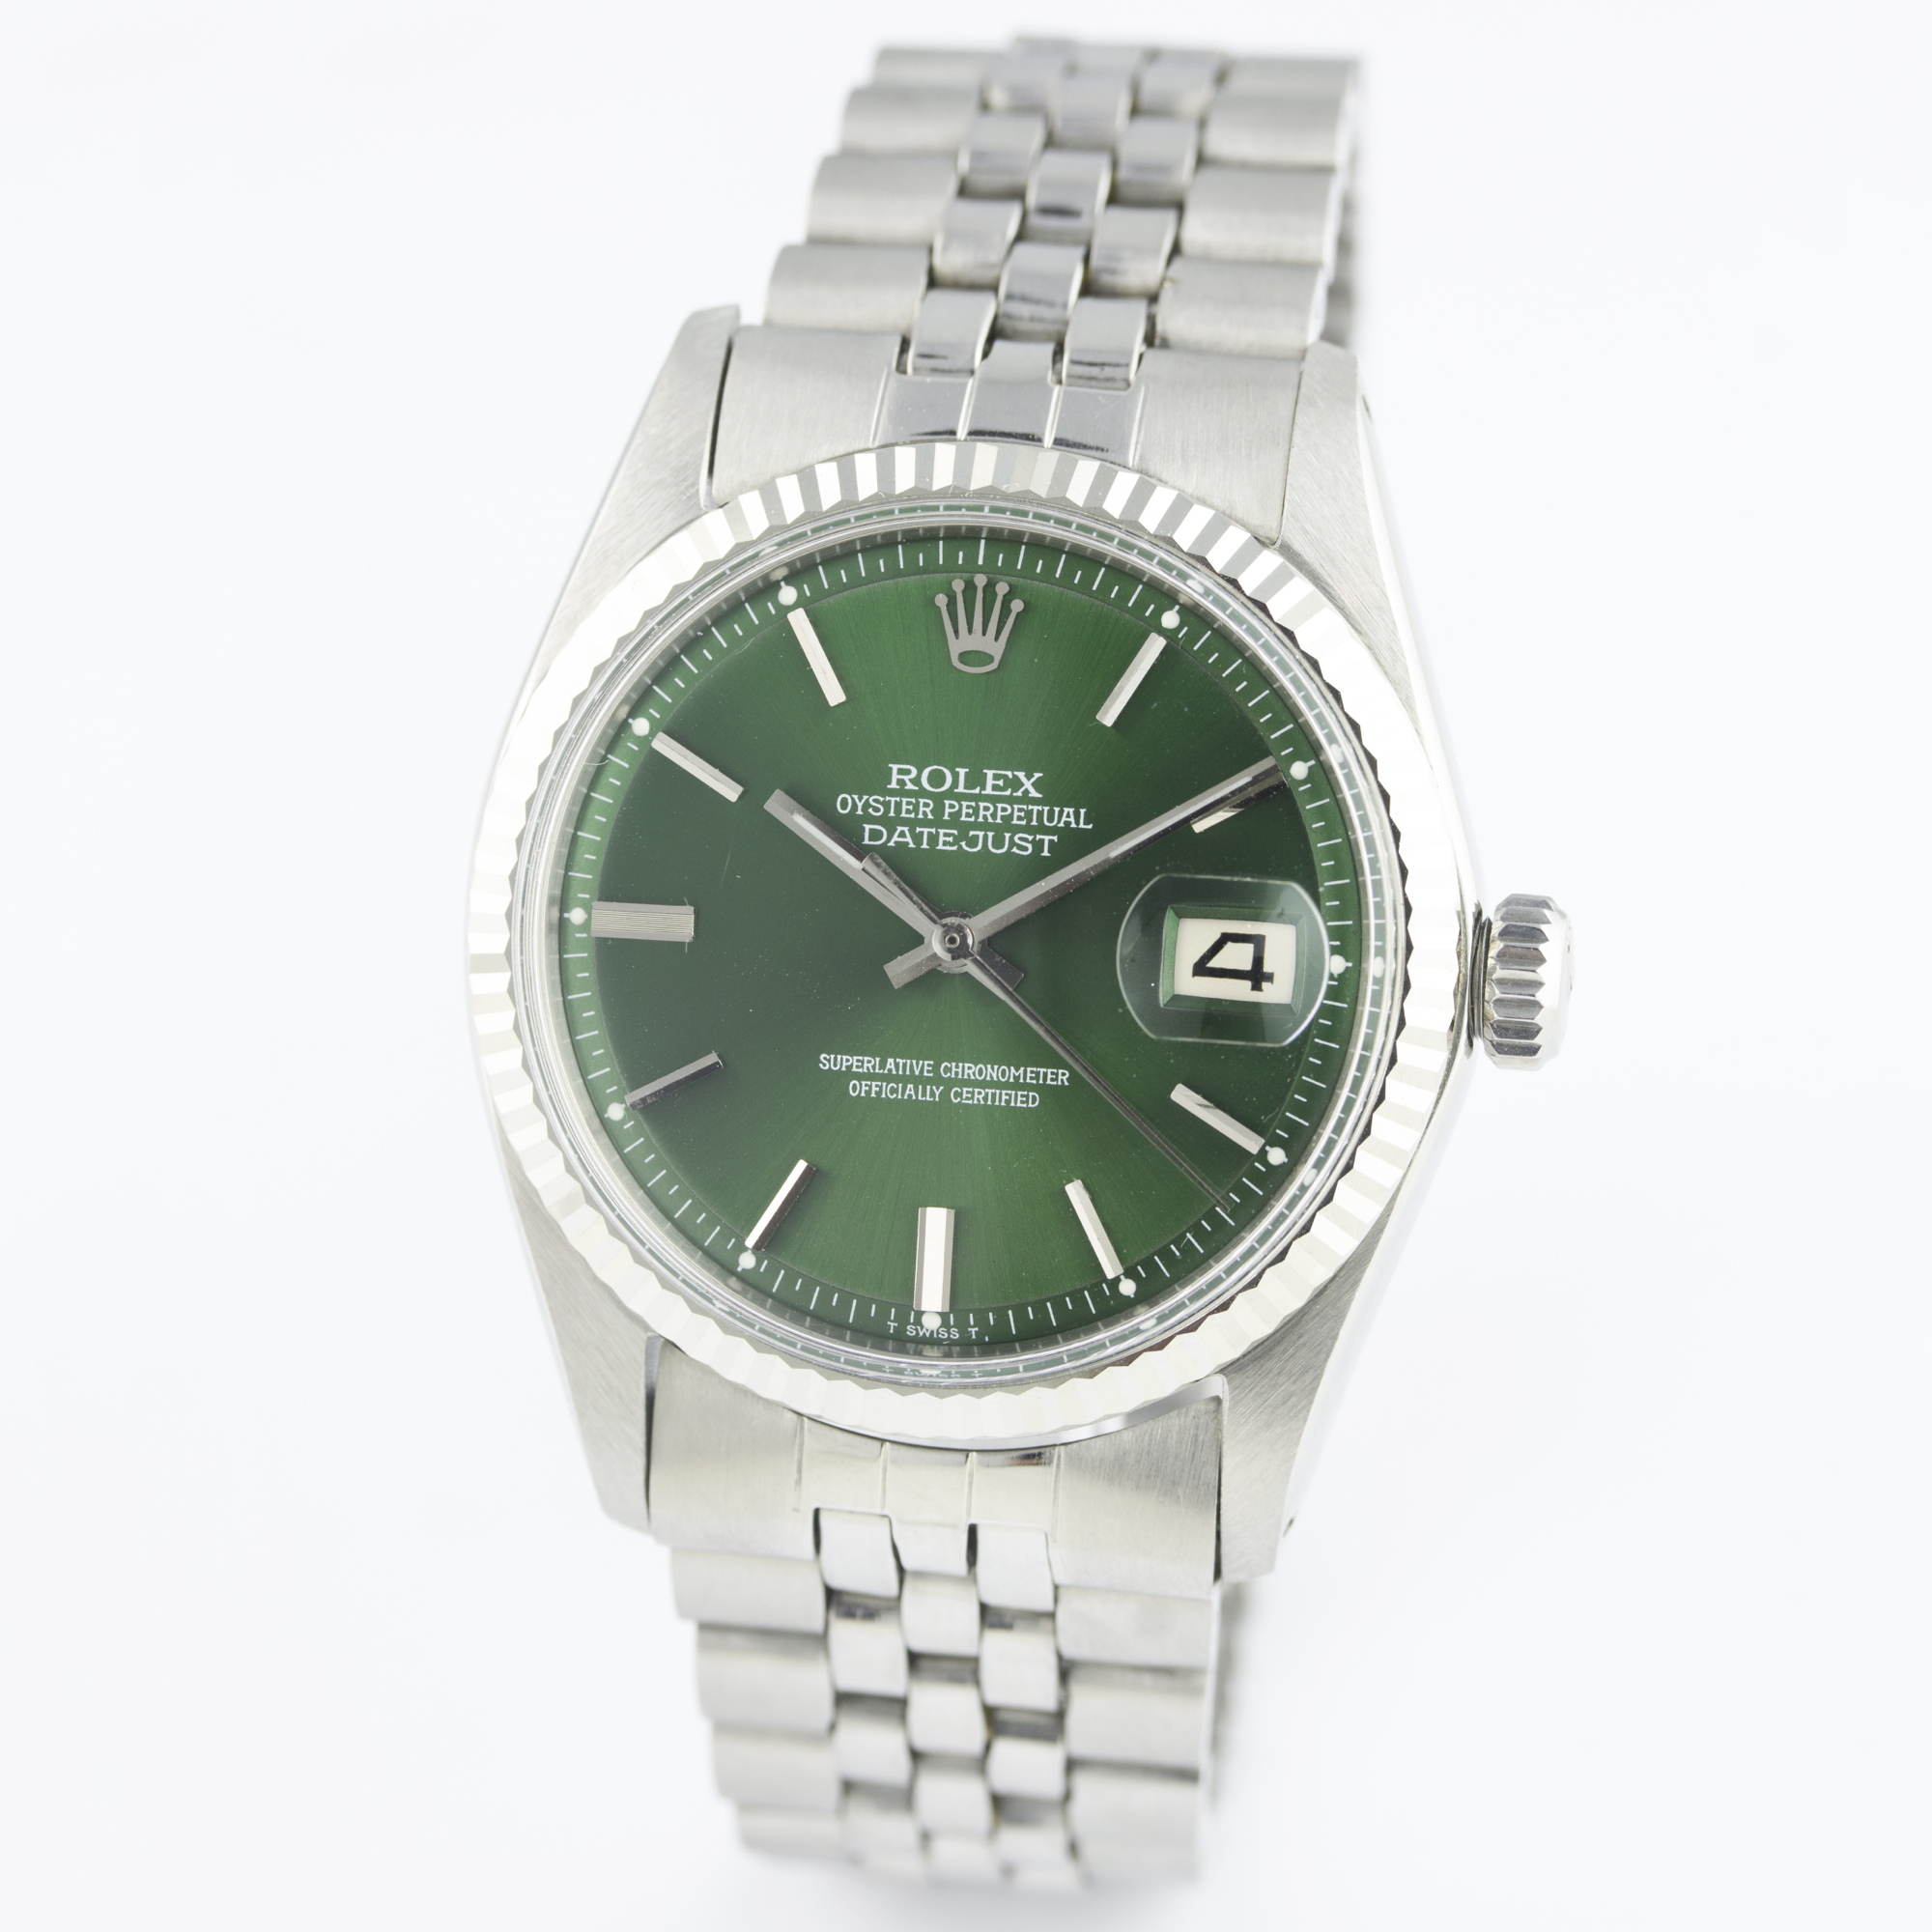 A GENTLEMAN'S STAINLESS STEEL & WHITE GOLD ROLEX OYSTER PERPETUAL DATEJUST BRACELET WATCH CIRCA - Image 2 of 10